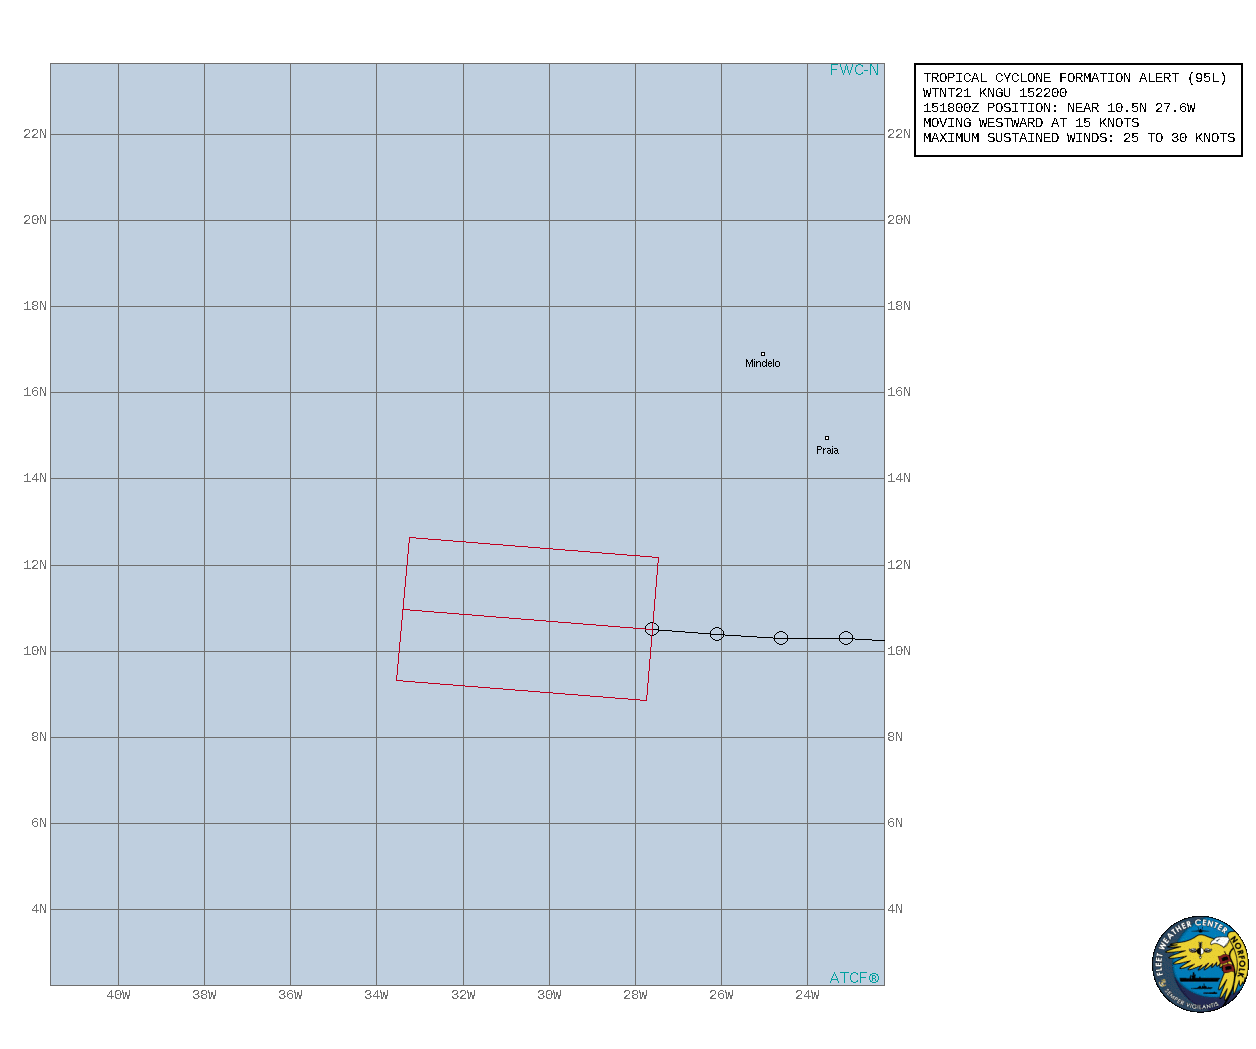 ATLANTIC. INVEST 95L. TROPICAL CYCLONE FORMATION ALERT ISSUED AT 15/22UTC.